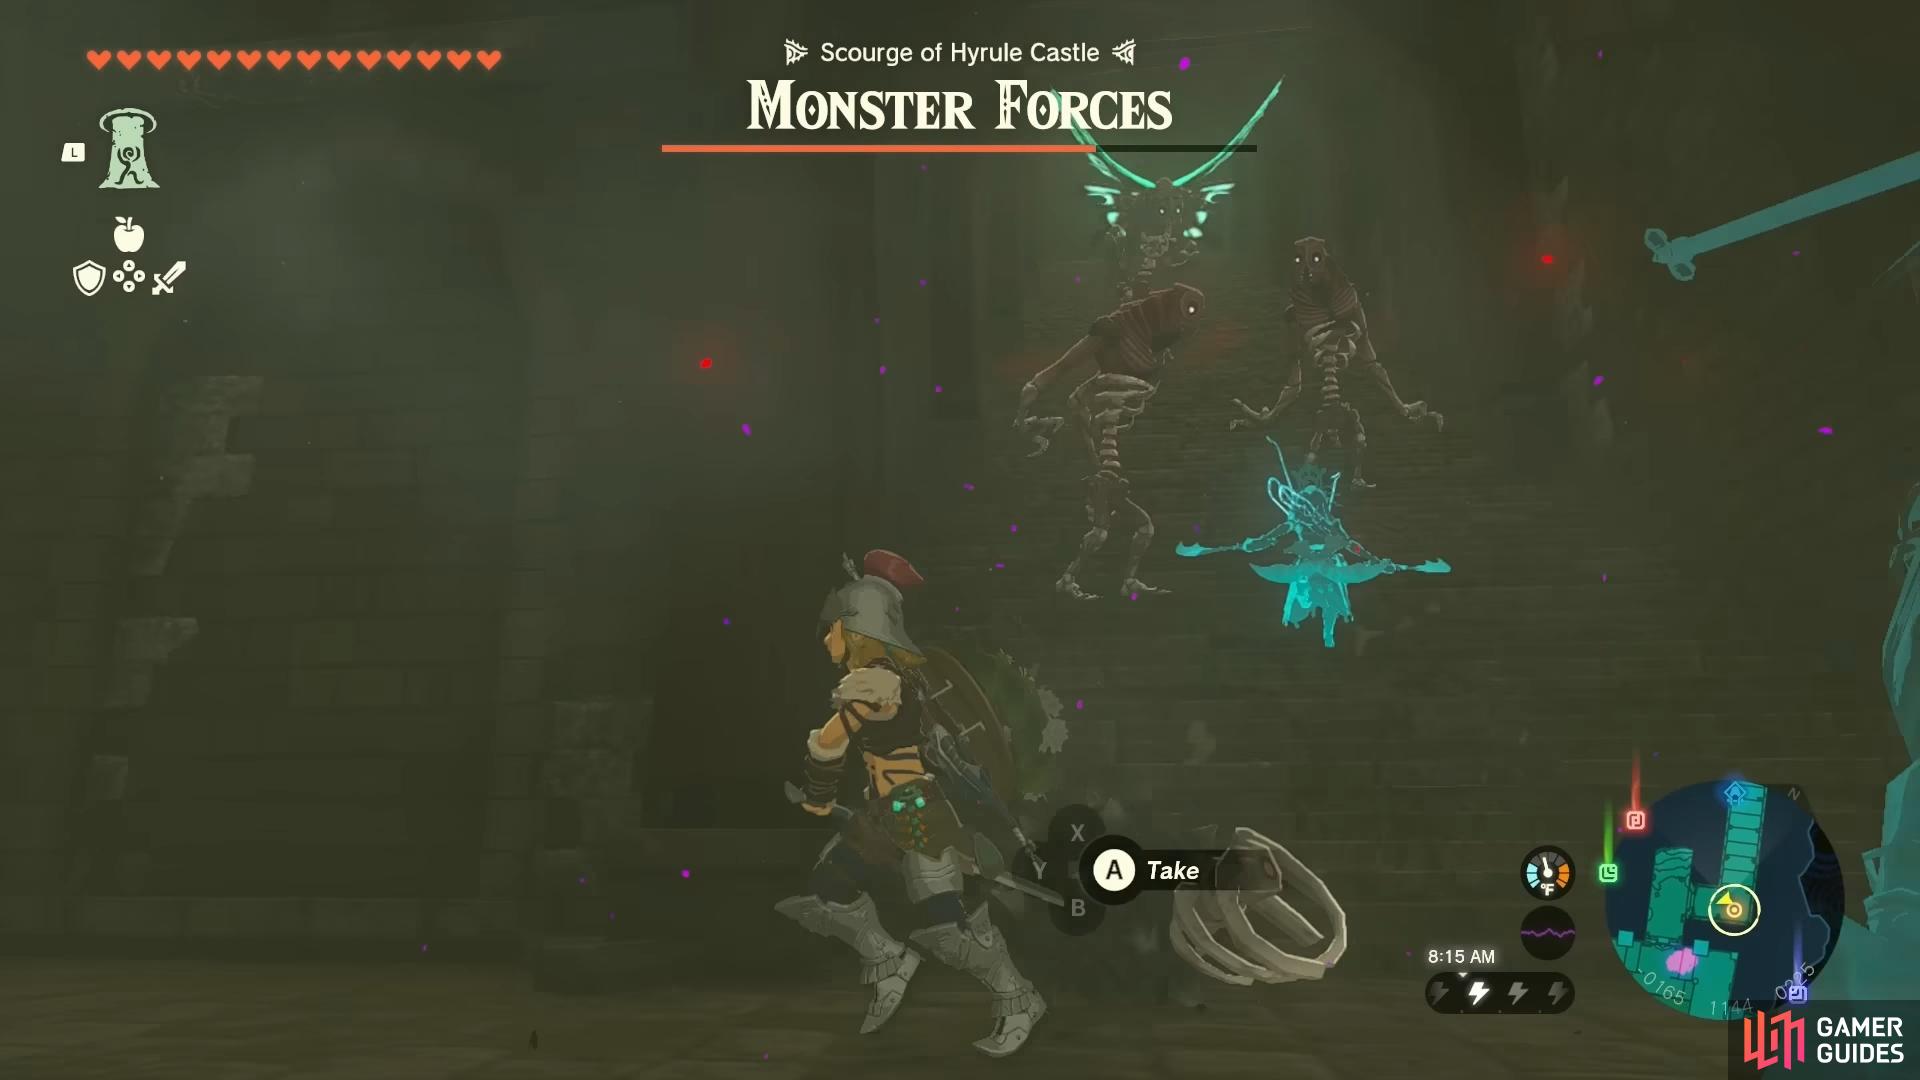 The third !Hyrule Castle Monster Forces battle containing !Gibdo